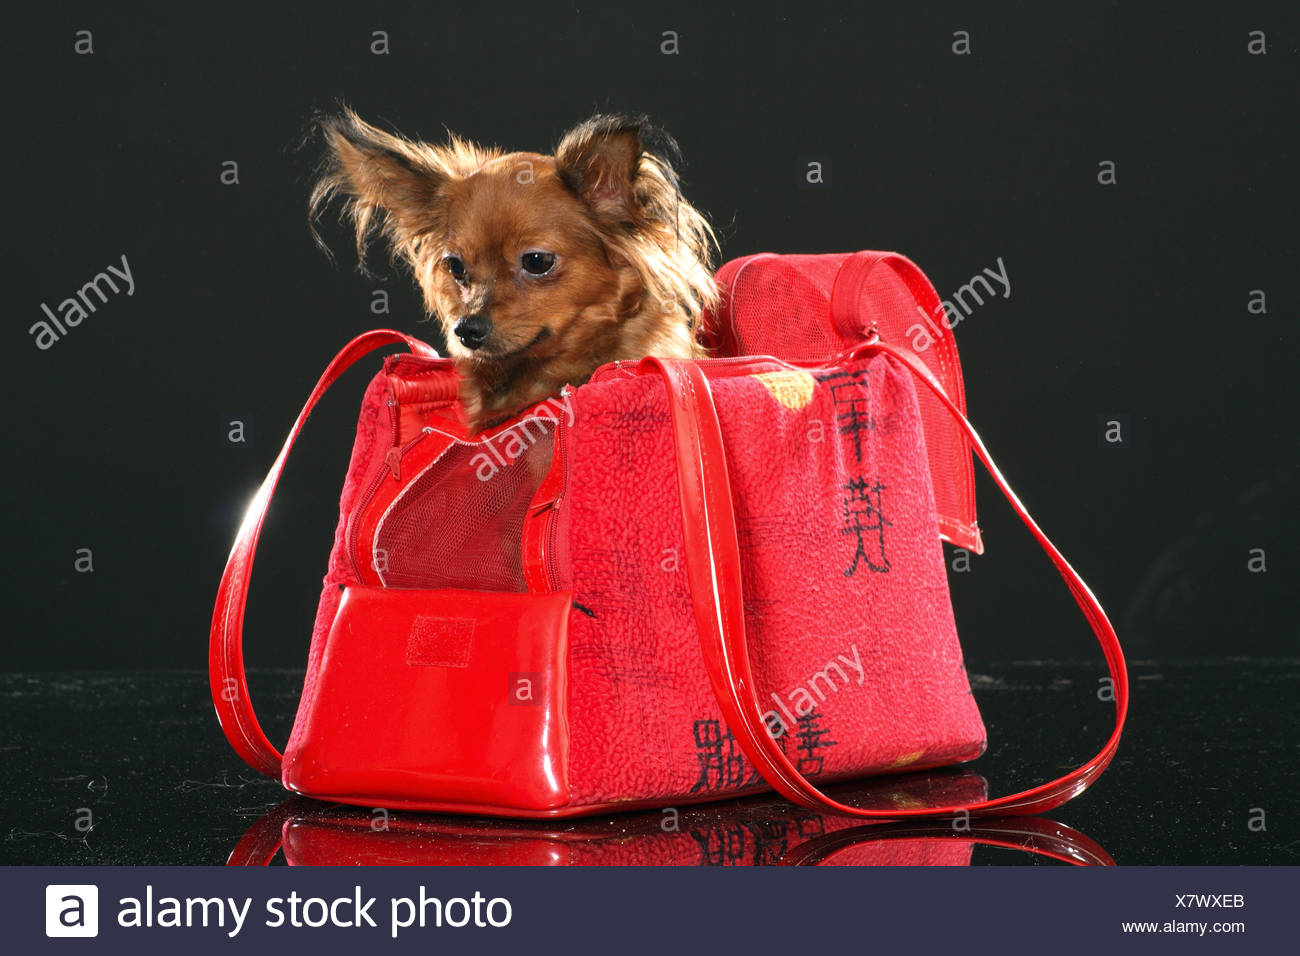 toy dog in a bag